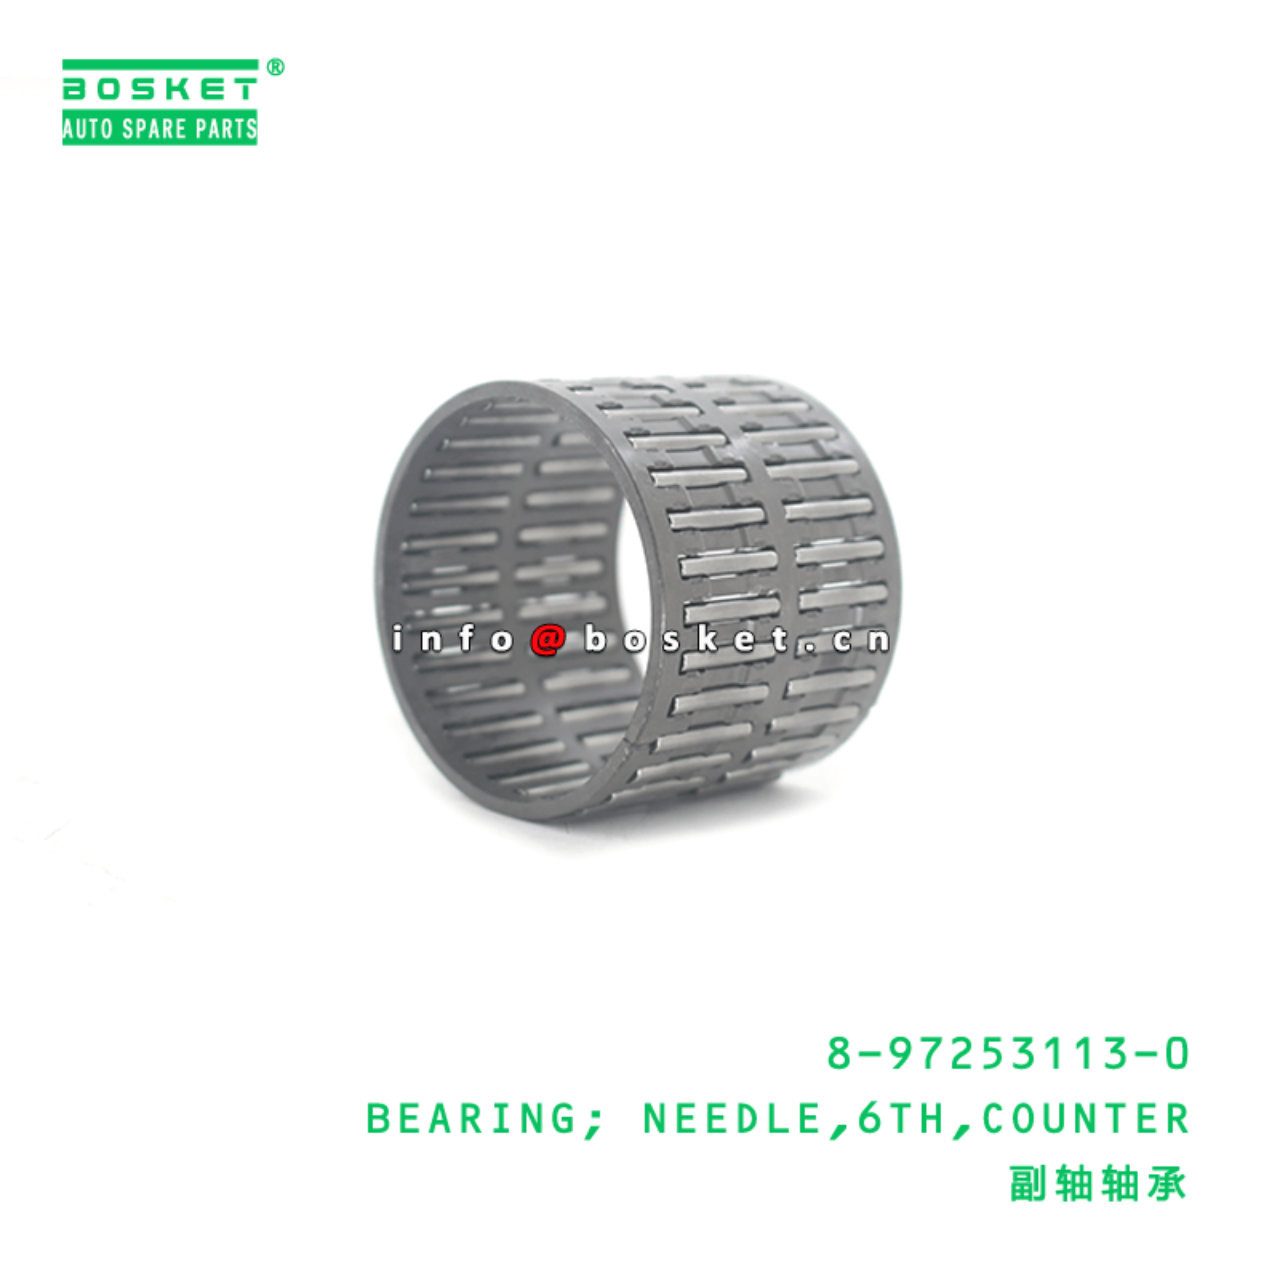 8-97253113-0 Counter Sixth Needle Bearing 8972531130 Suitable for ISUZU FRR